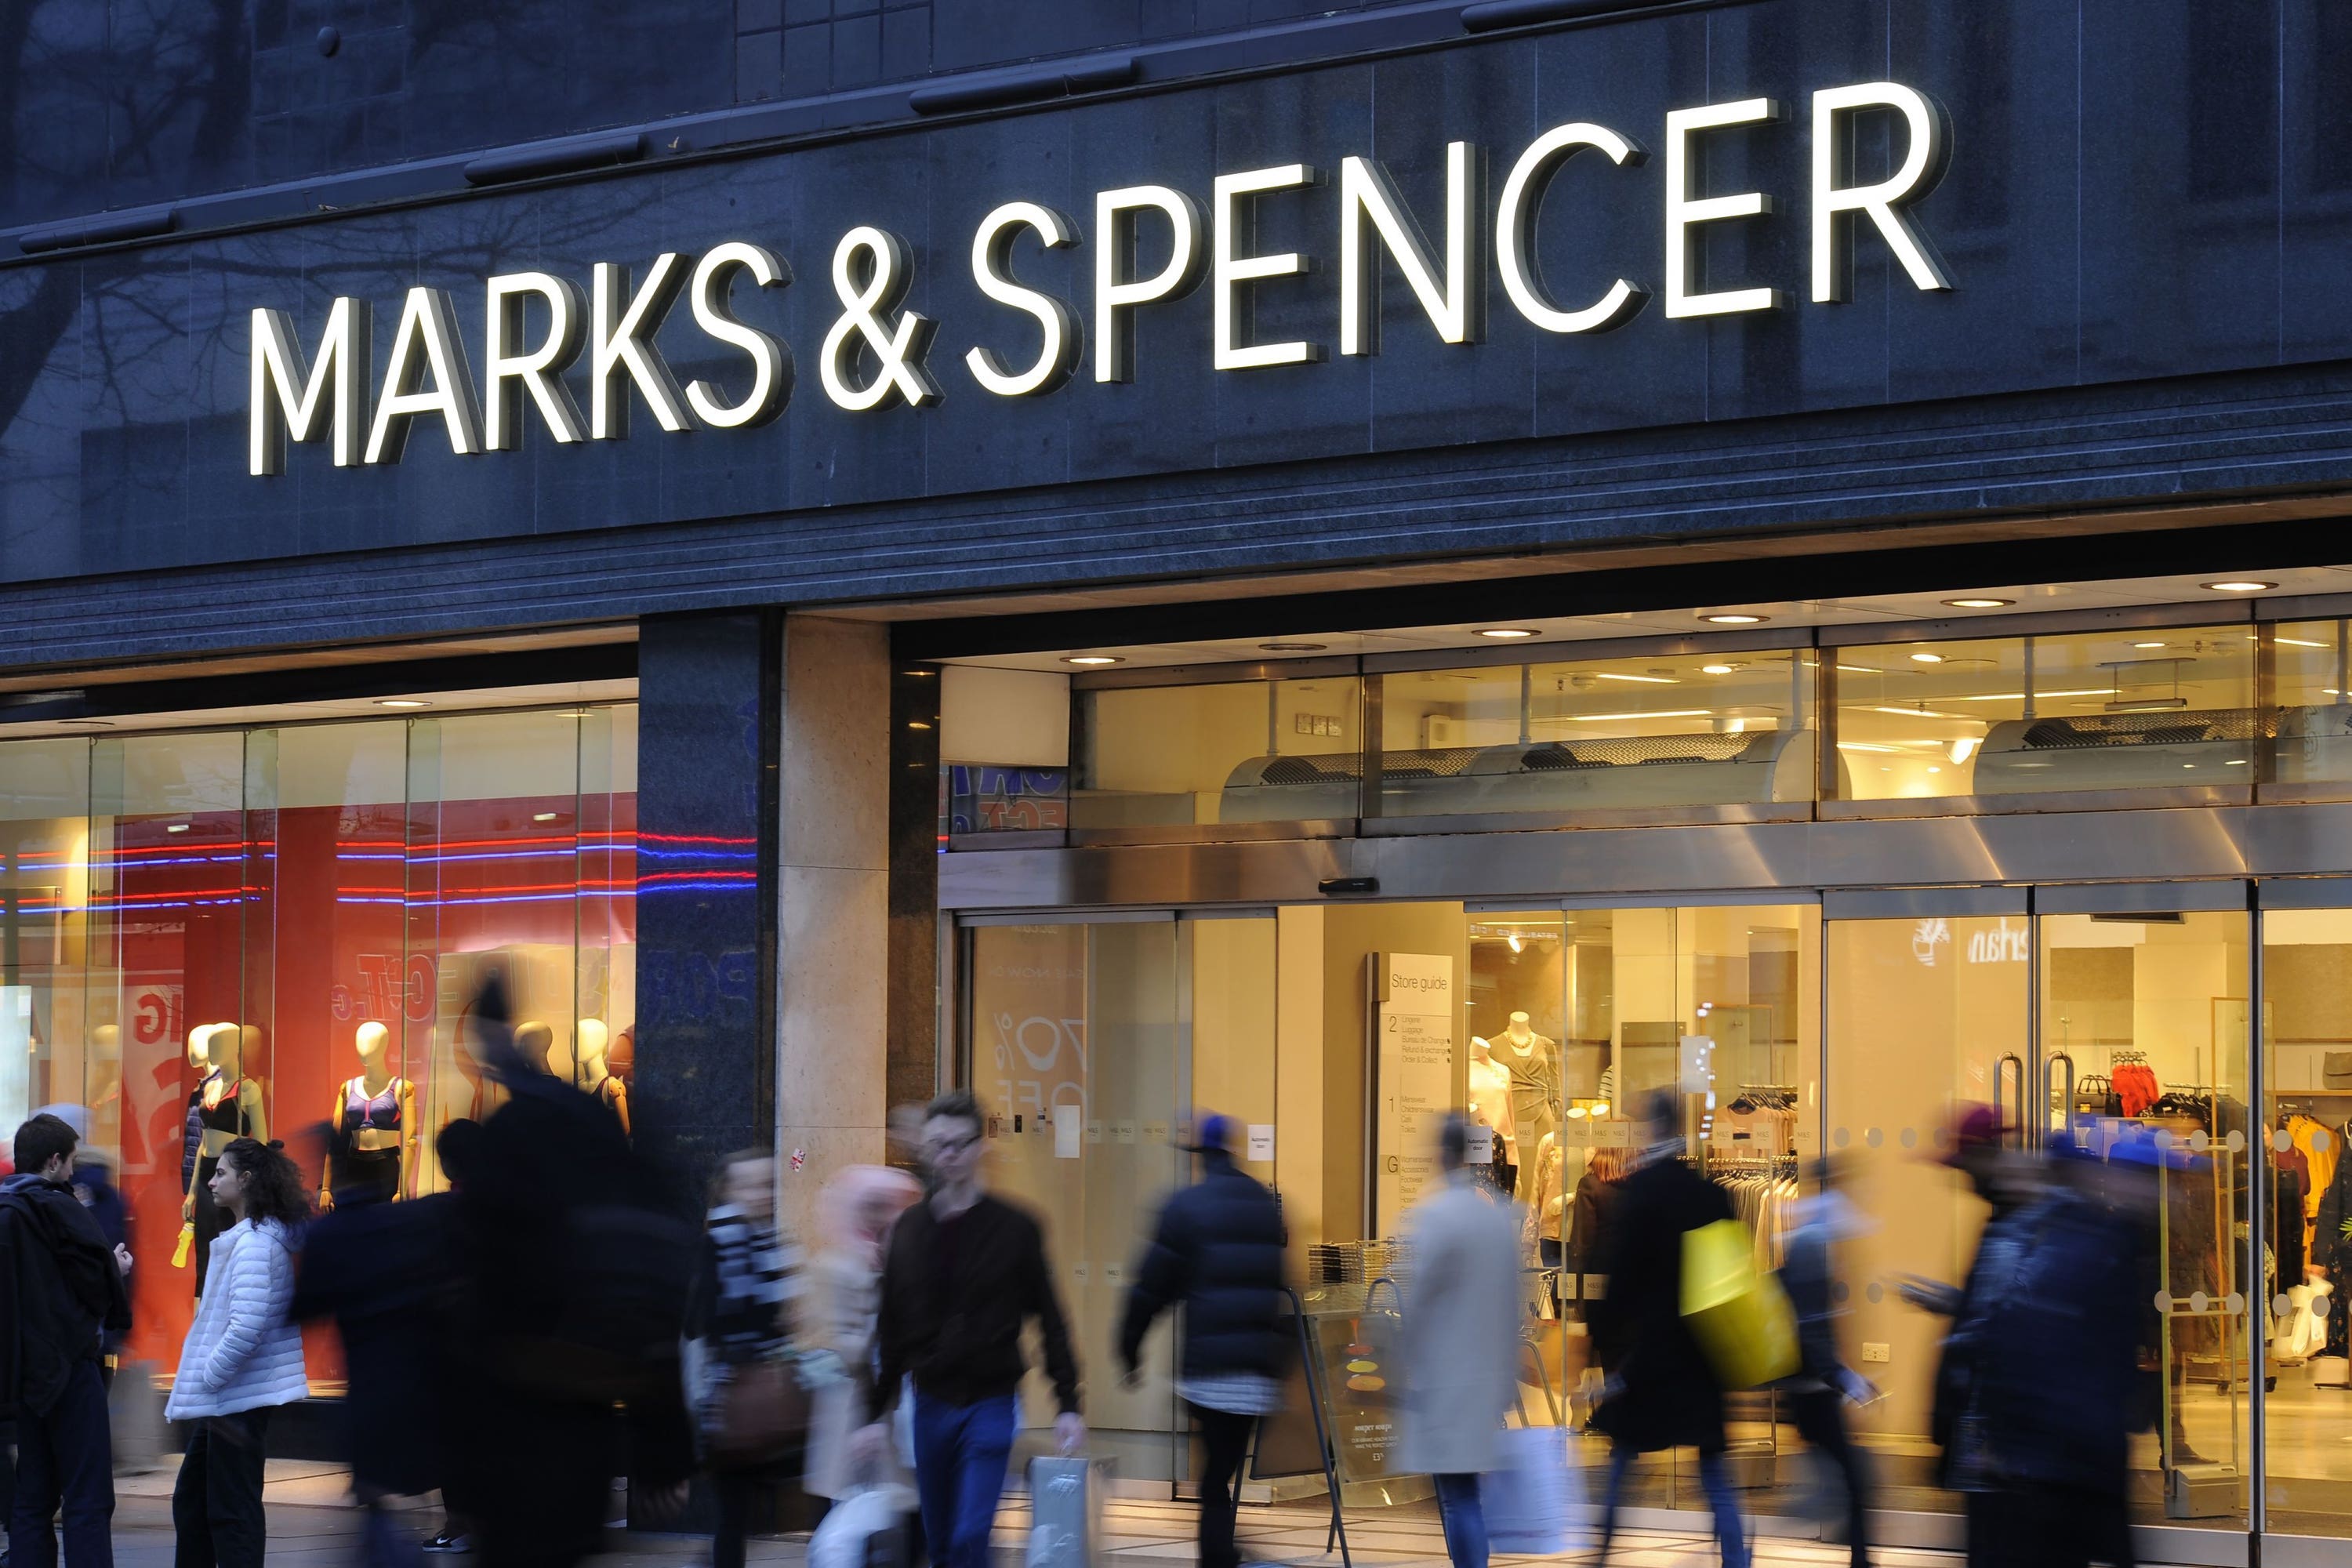 Marks & Spencer looks healthy again after decades in the doldrums